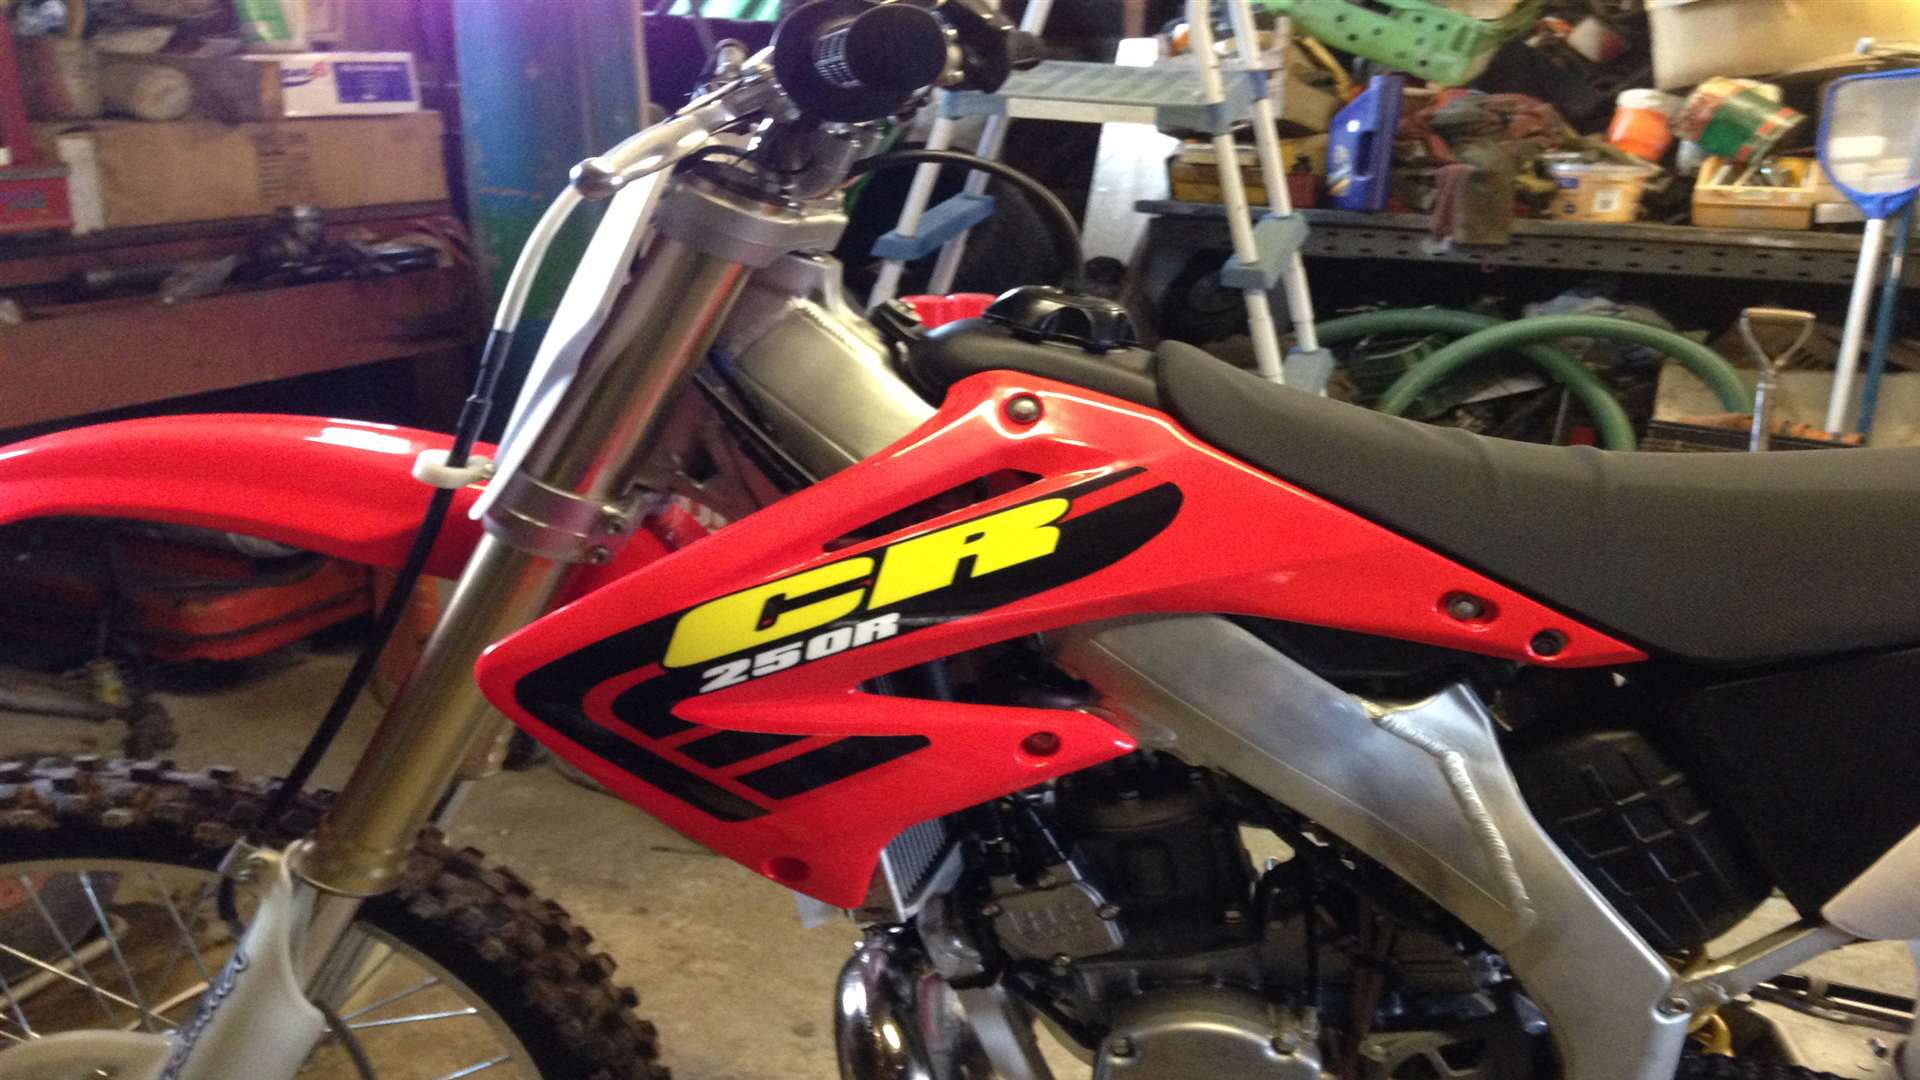 A Honda motorcycle was also taken during the same theft. Picture: Kent Police